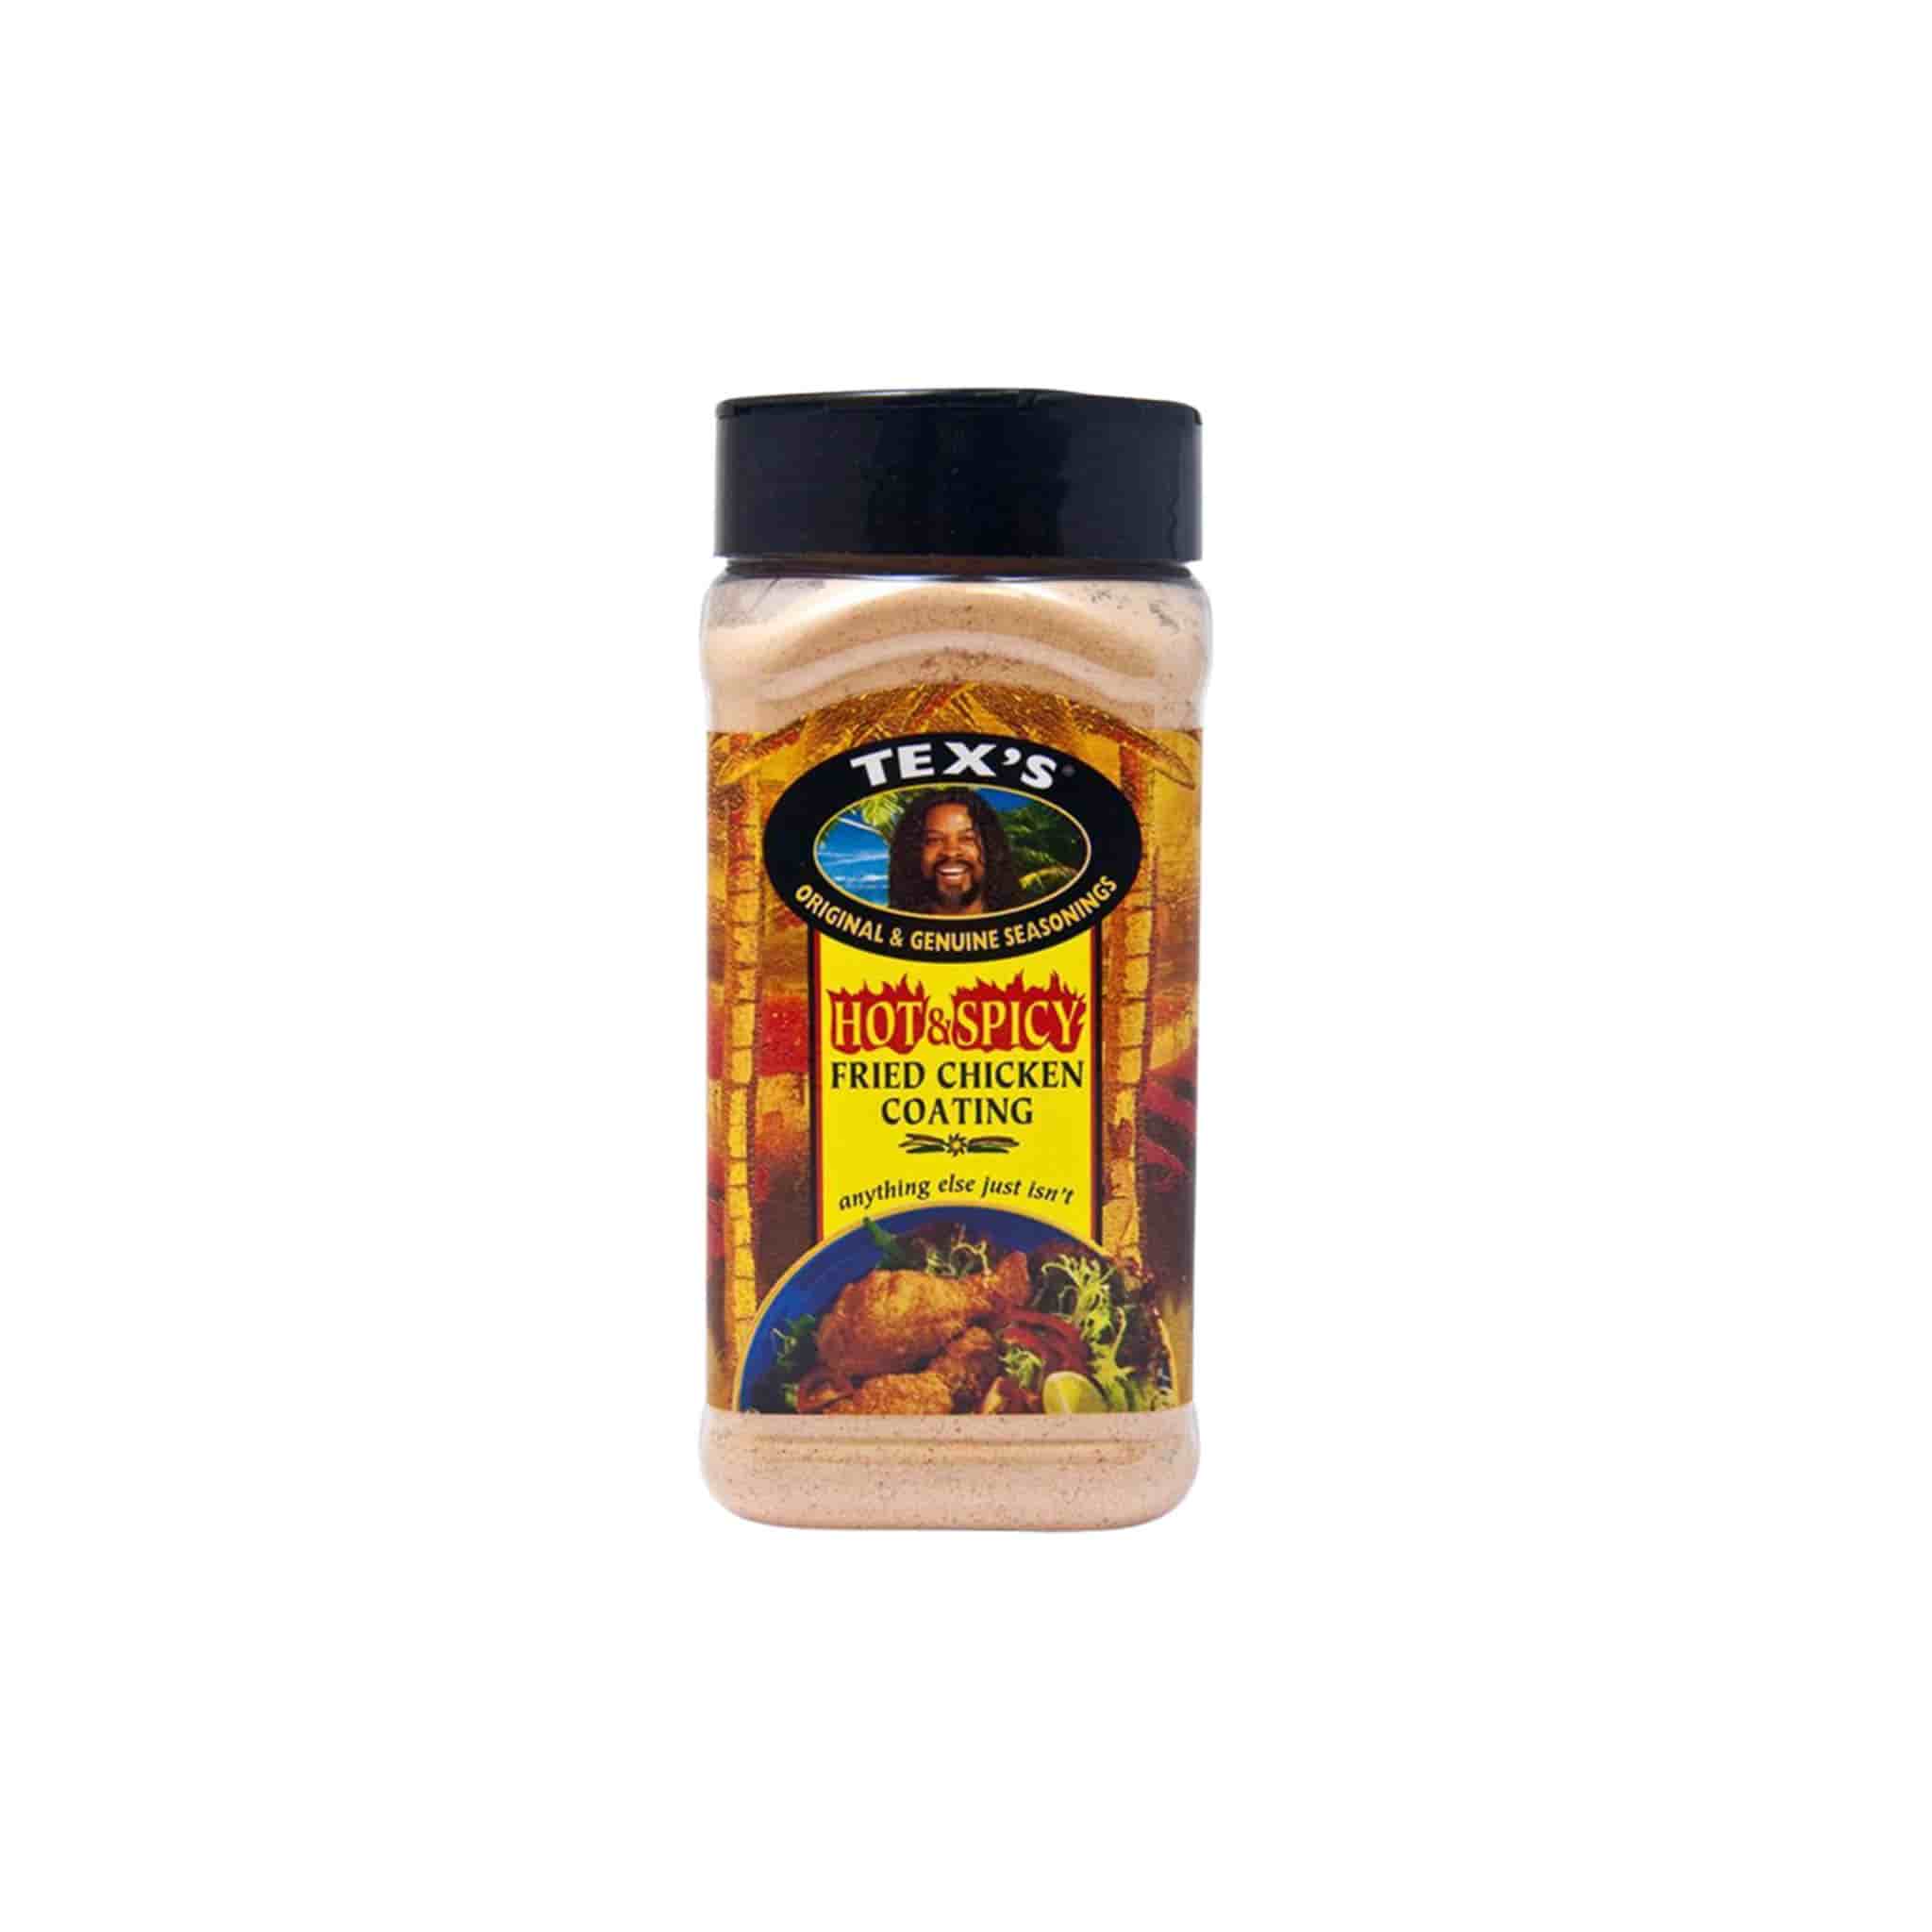 Texs Hot & Spicy Chicken Coating, 300g